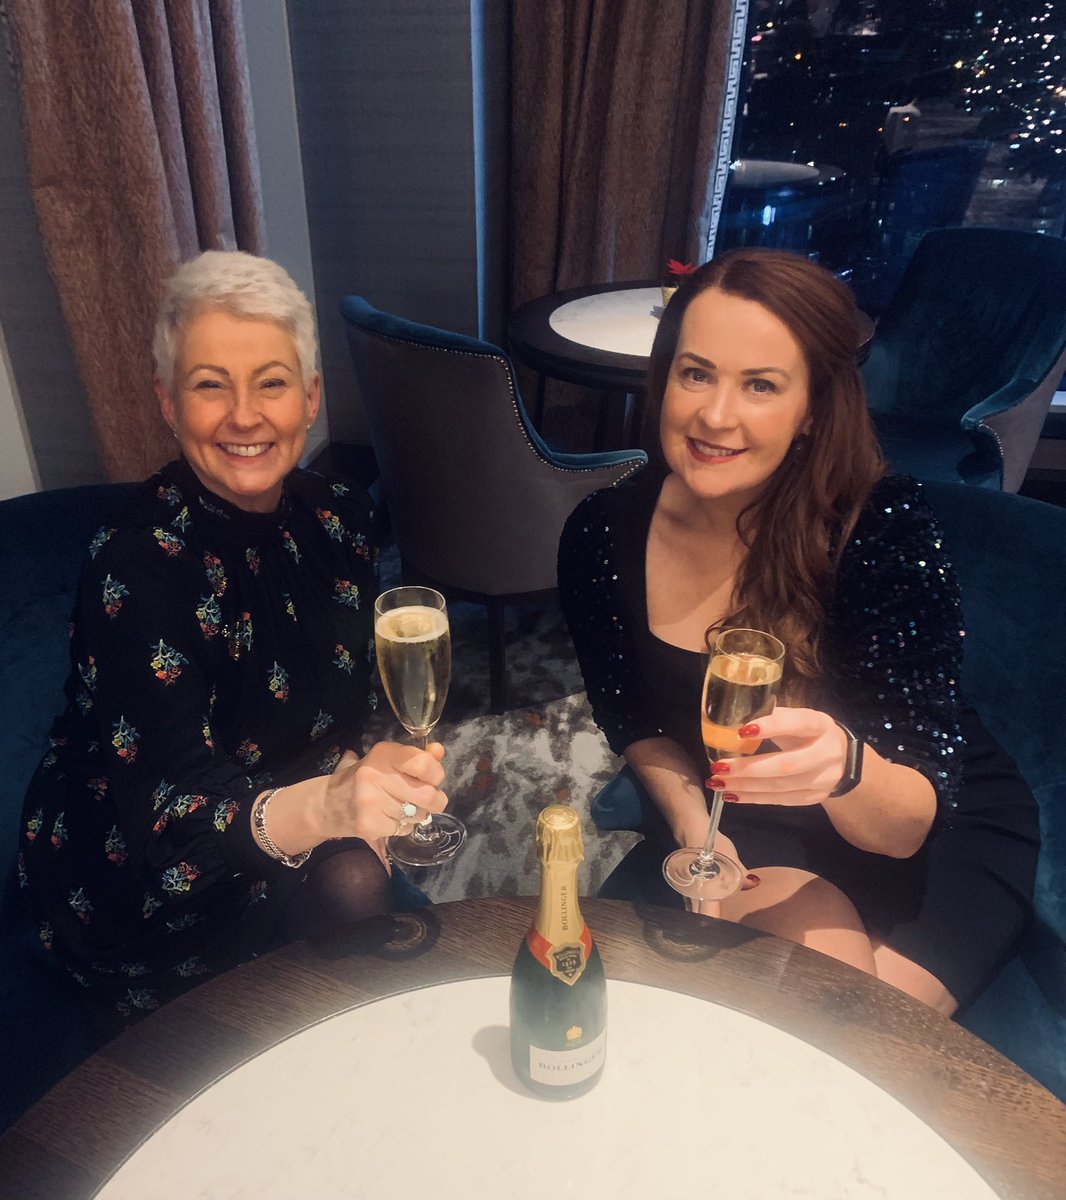 Celebrating only the best this evening in Belfast @PamBallantine on her MBE!
So well deserved and so very proud ❤️

#2024 #legend #whatayear #UTVLIFE #thrilledforyou x